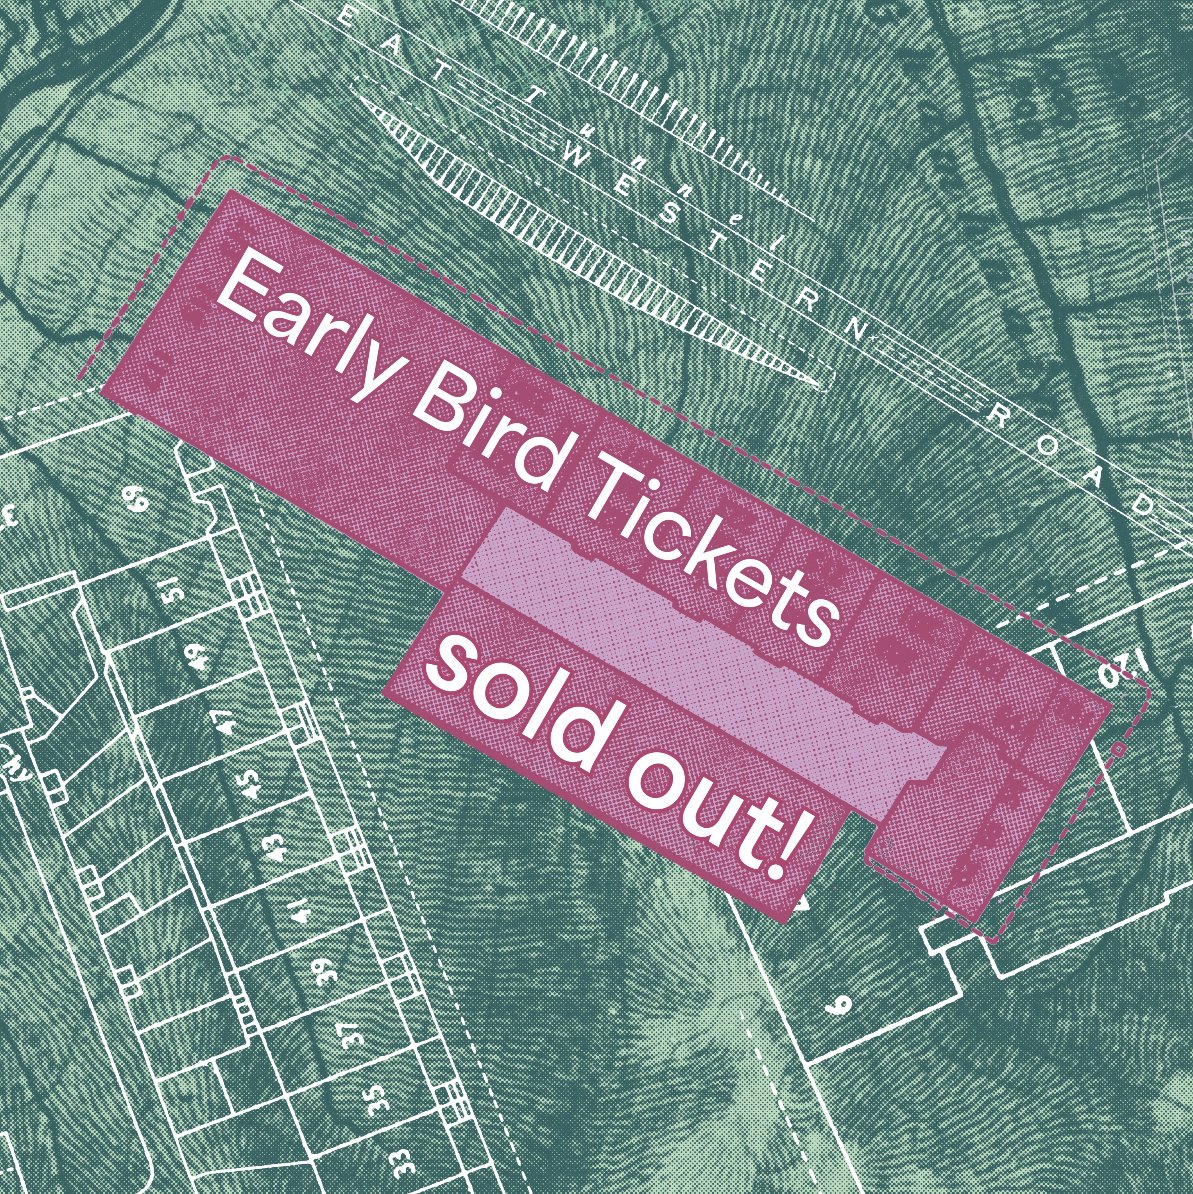 TGW 2023 early bird tickets have now SOLD OUT🚨 General admission tickets now available! Thank you to everyone who has bought a ticket so far...November can't come quick enough 🥳 🎫: bit.ly/TGW-tickets #thegreatwestern2023 #TGW2023